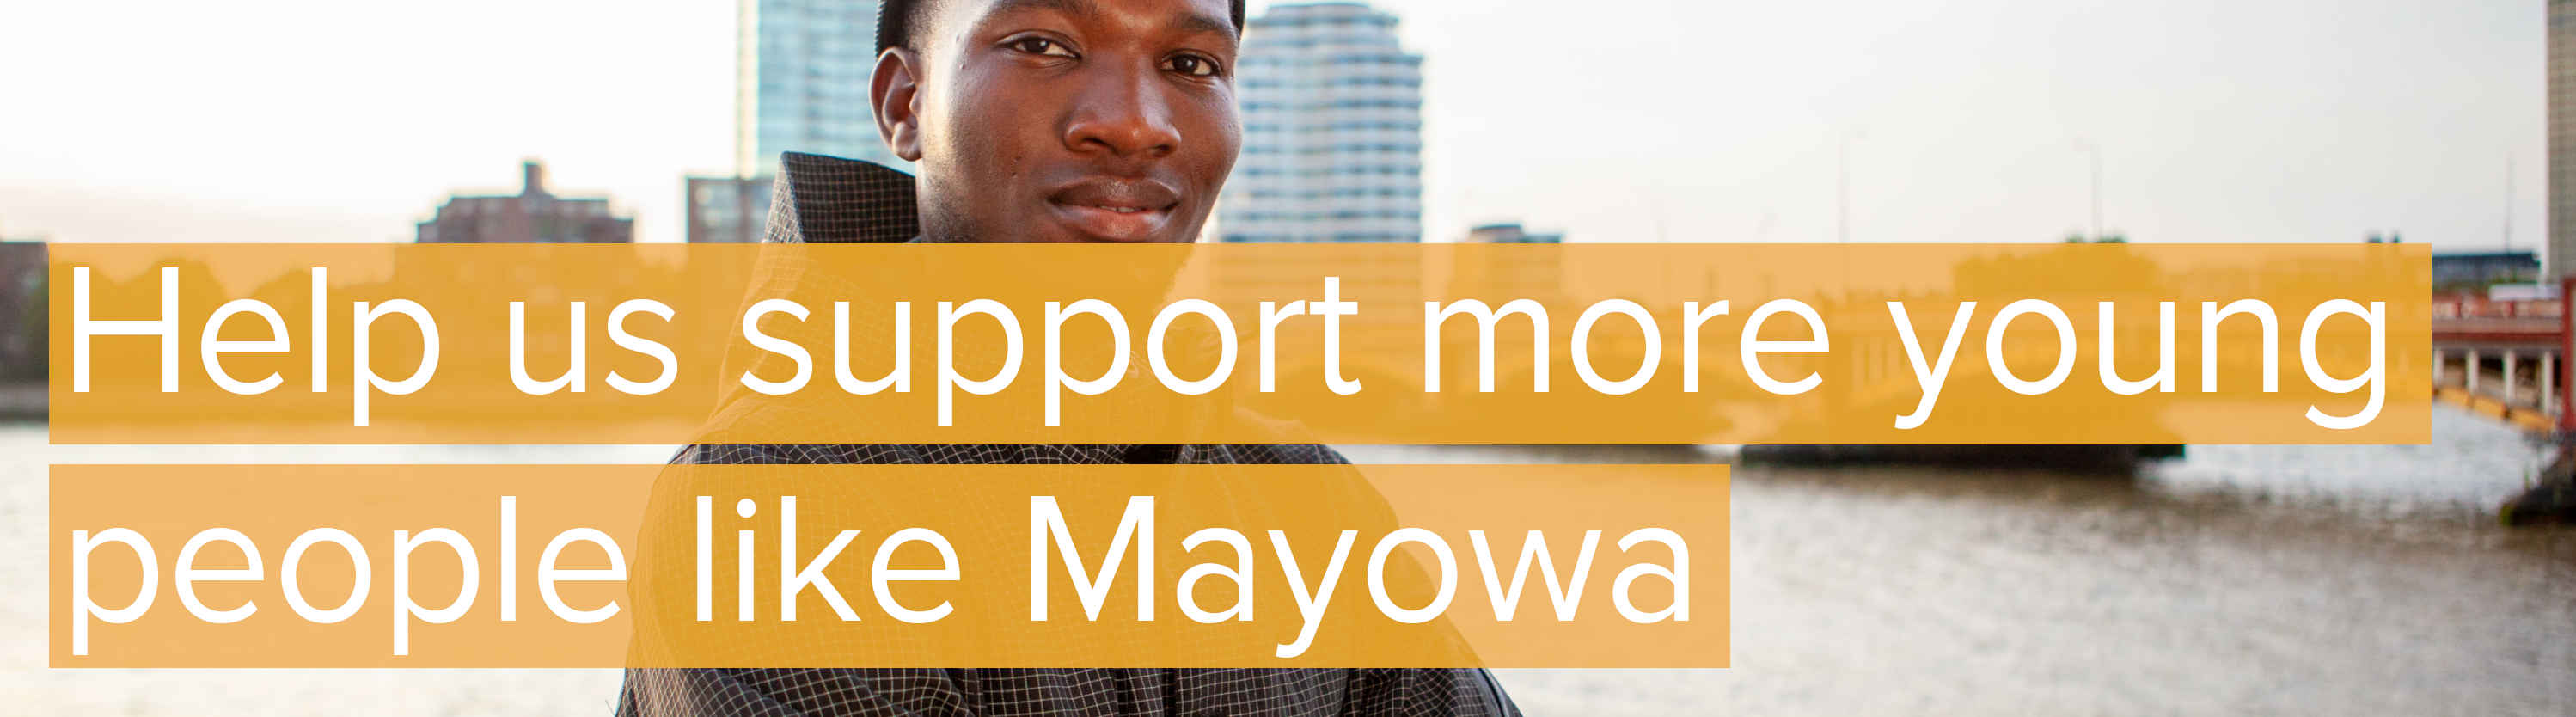 Help us support more young people like Mayowa